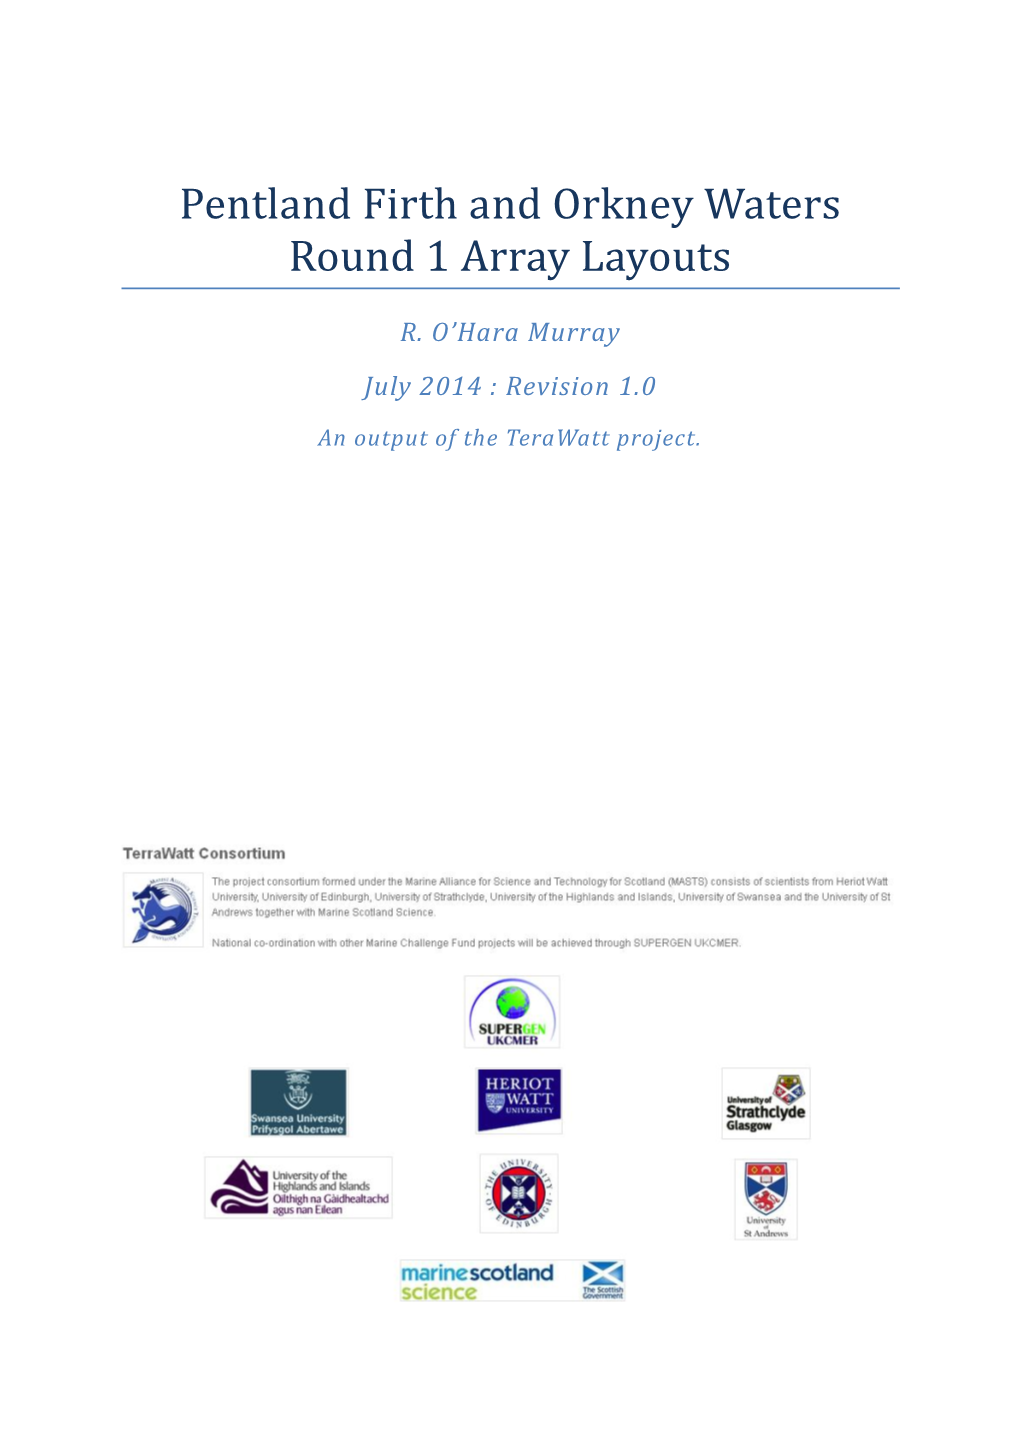 Pentland Firth and Orkney Waters Round 1 Array Layouts